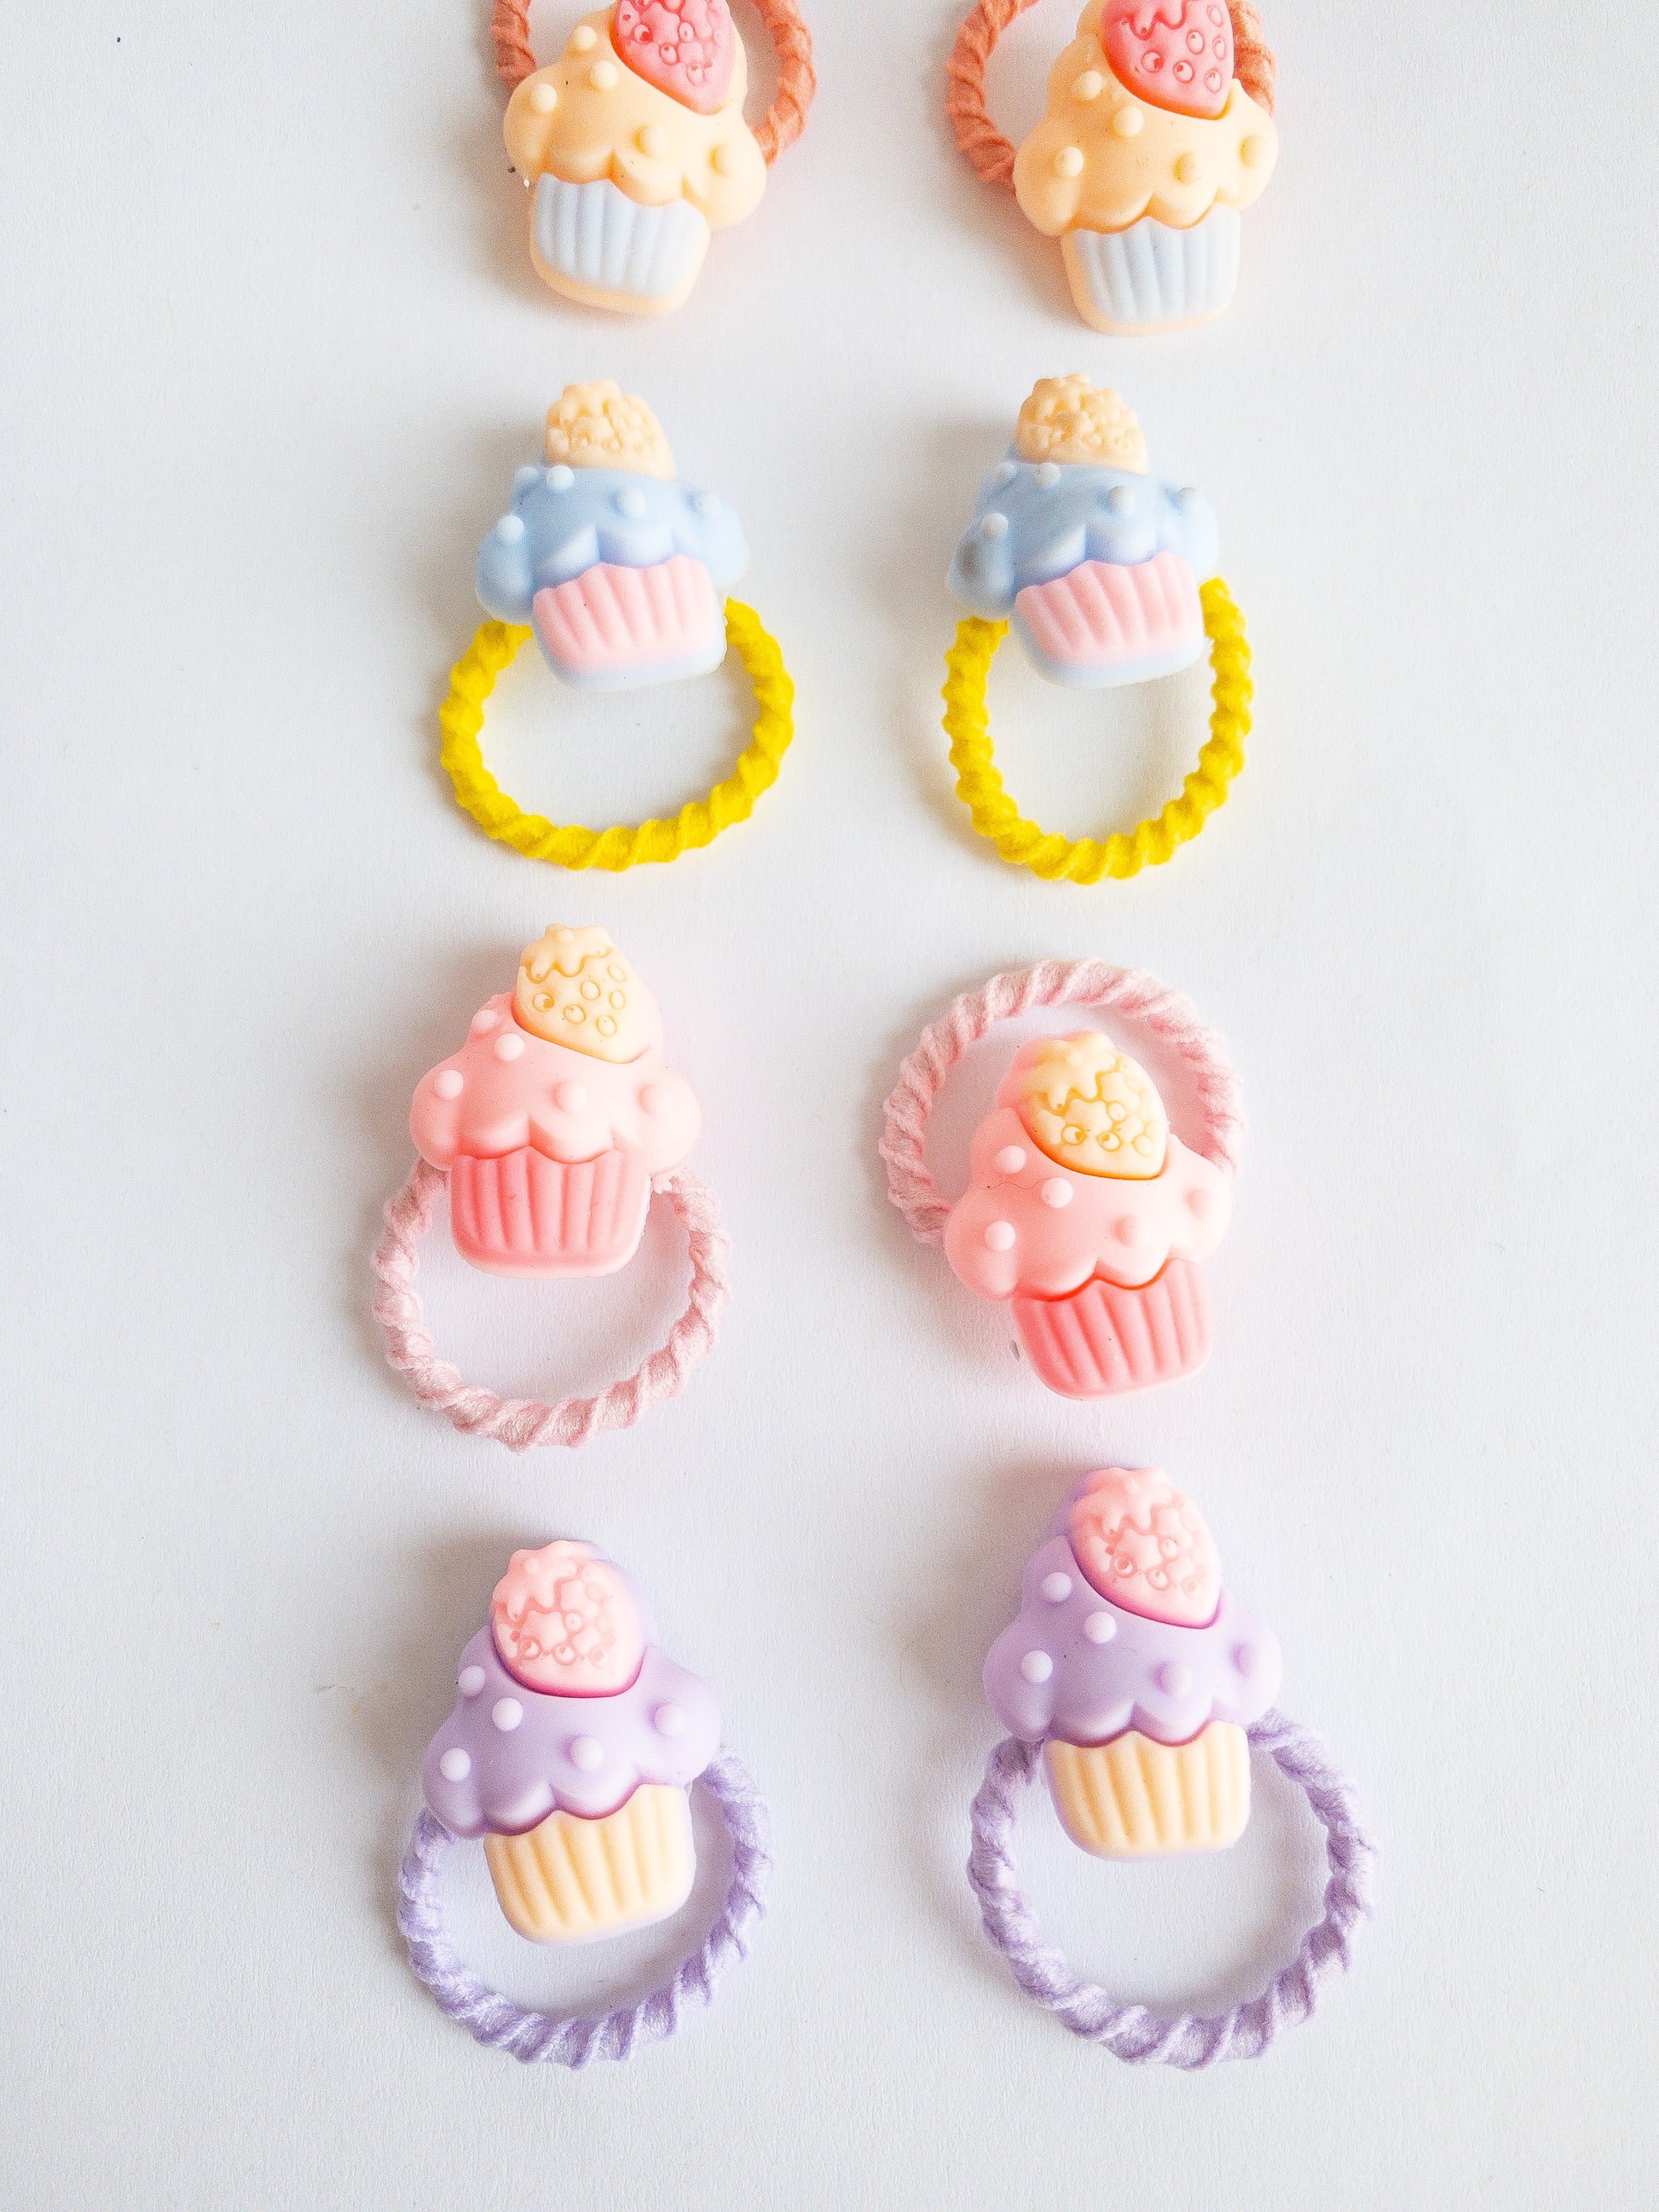 Candy colored little strawberry cupcake hair ties in sweet sets. These 10 hair ties come in pairs and are a great size for fun styles. The soft hair ties are gentle on hair and the sweetened mini cakes just give it that extra pop.